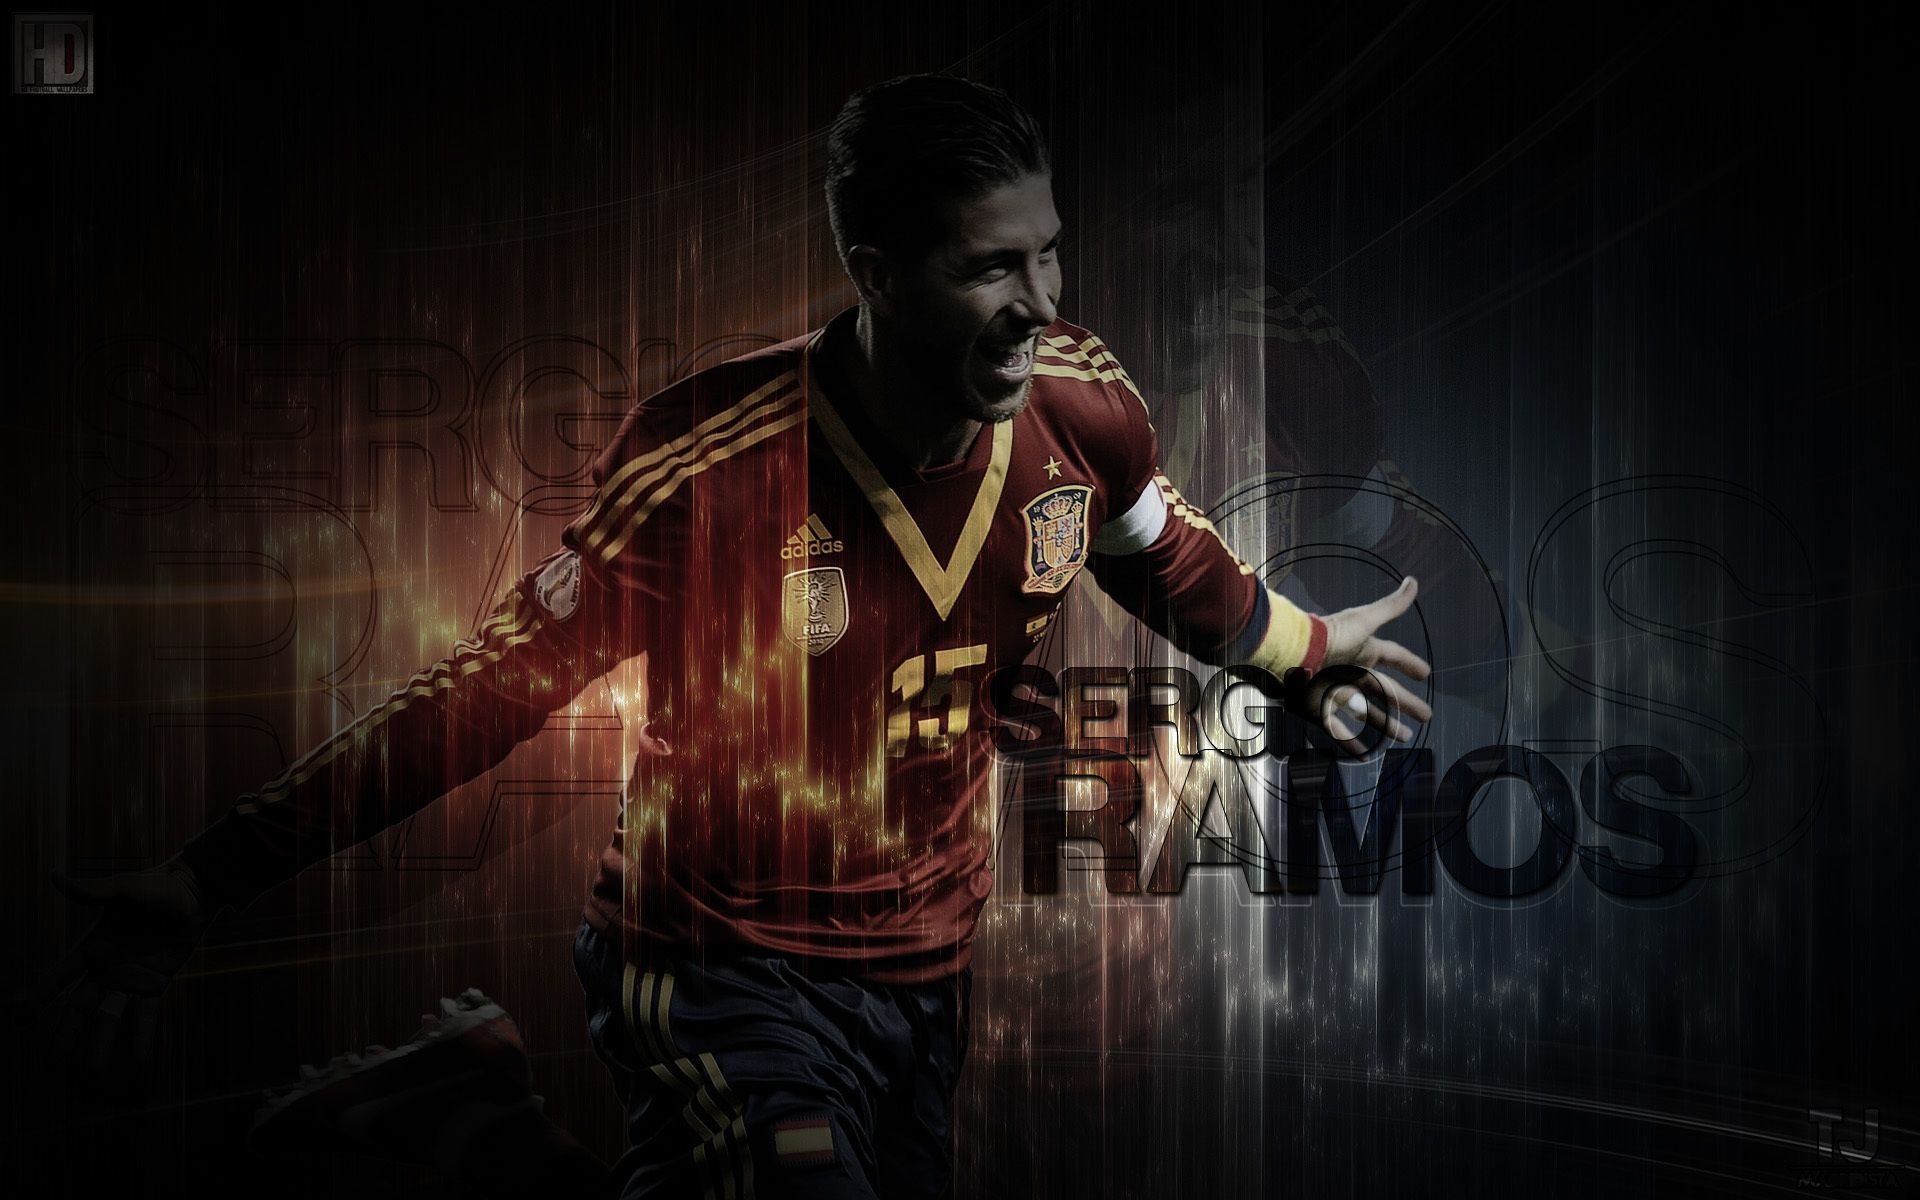 Real Madrid Sergio Ramos number 15 wallpapers and images ...